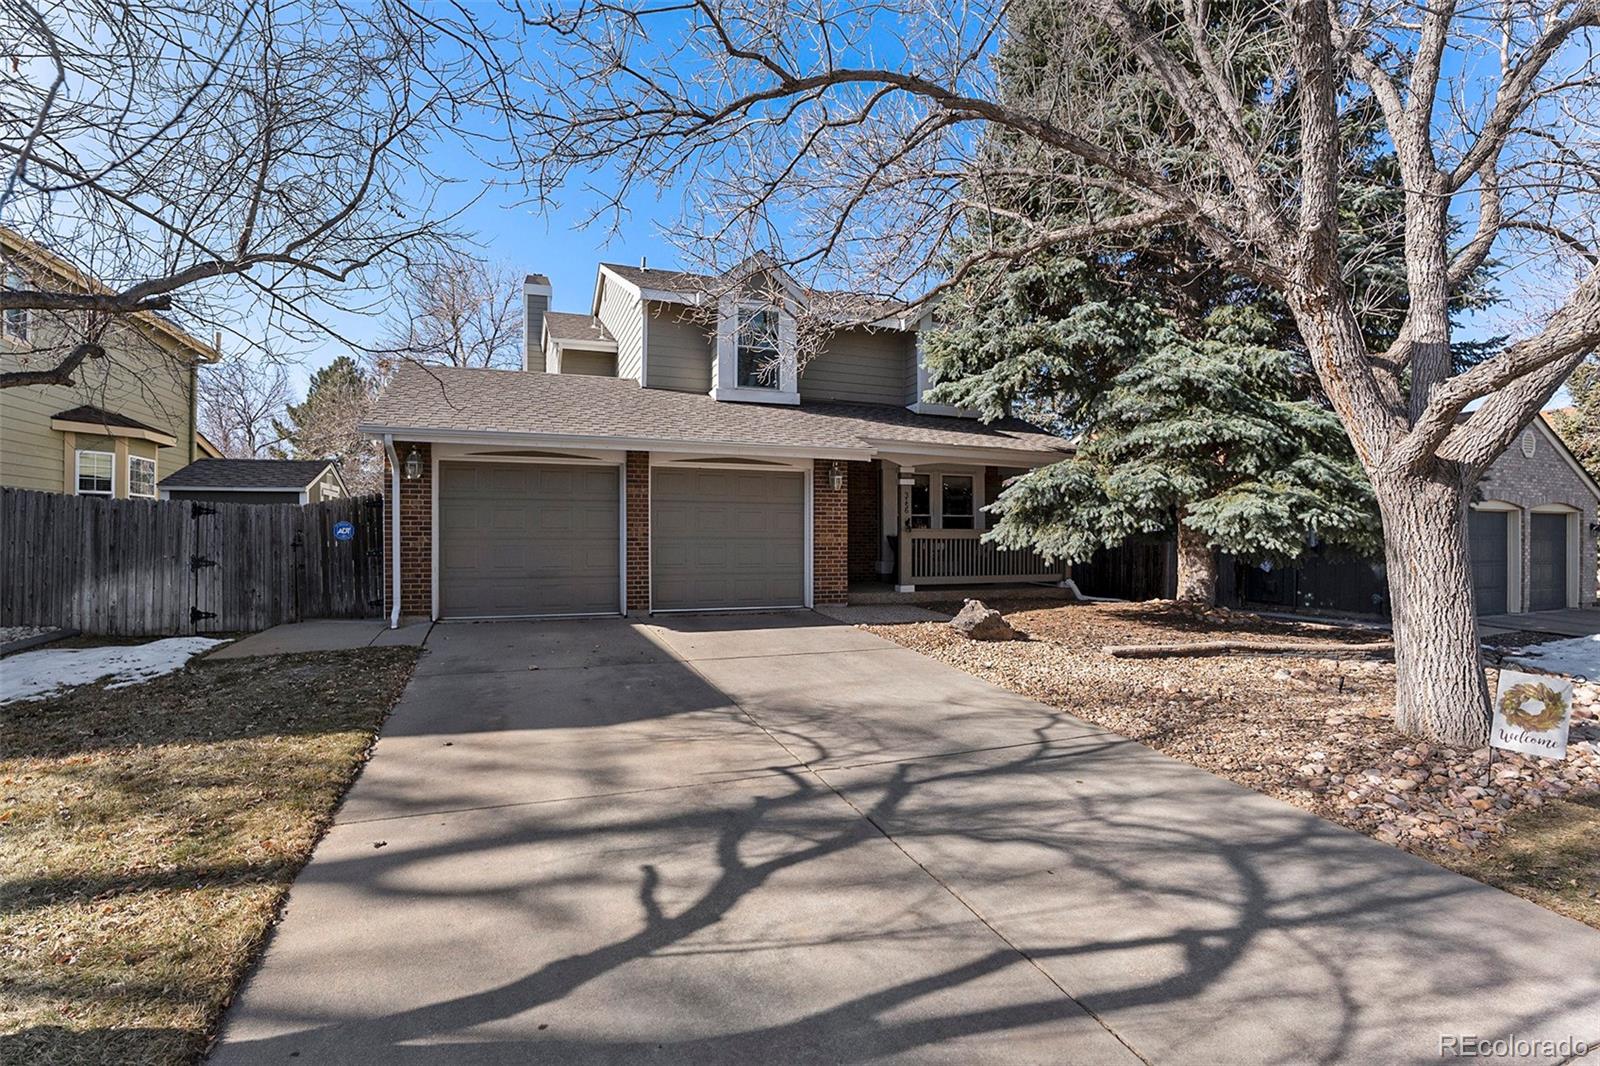 3156 w 100th drive, Westminster sold home. Closed on 2024-03-28 for $685,000.